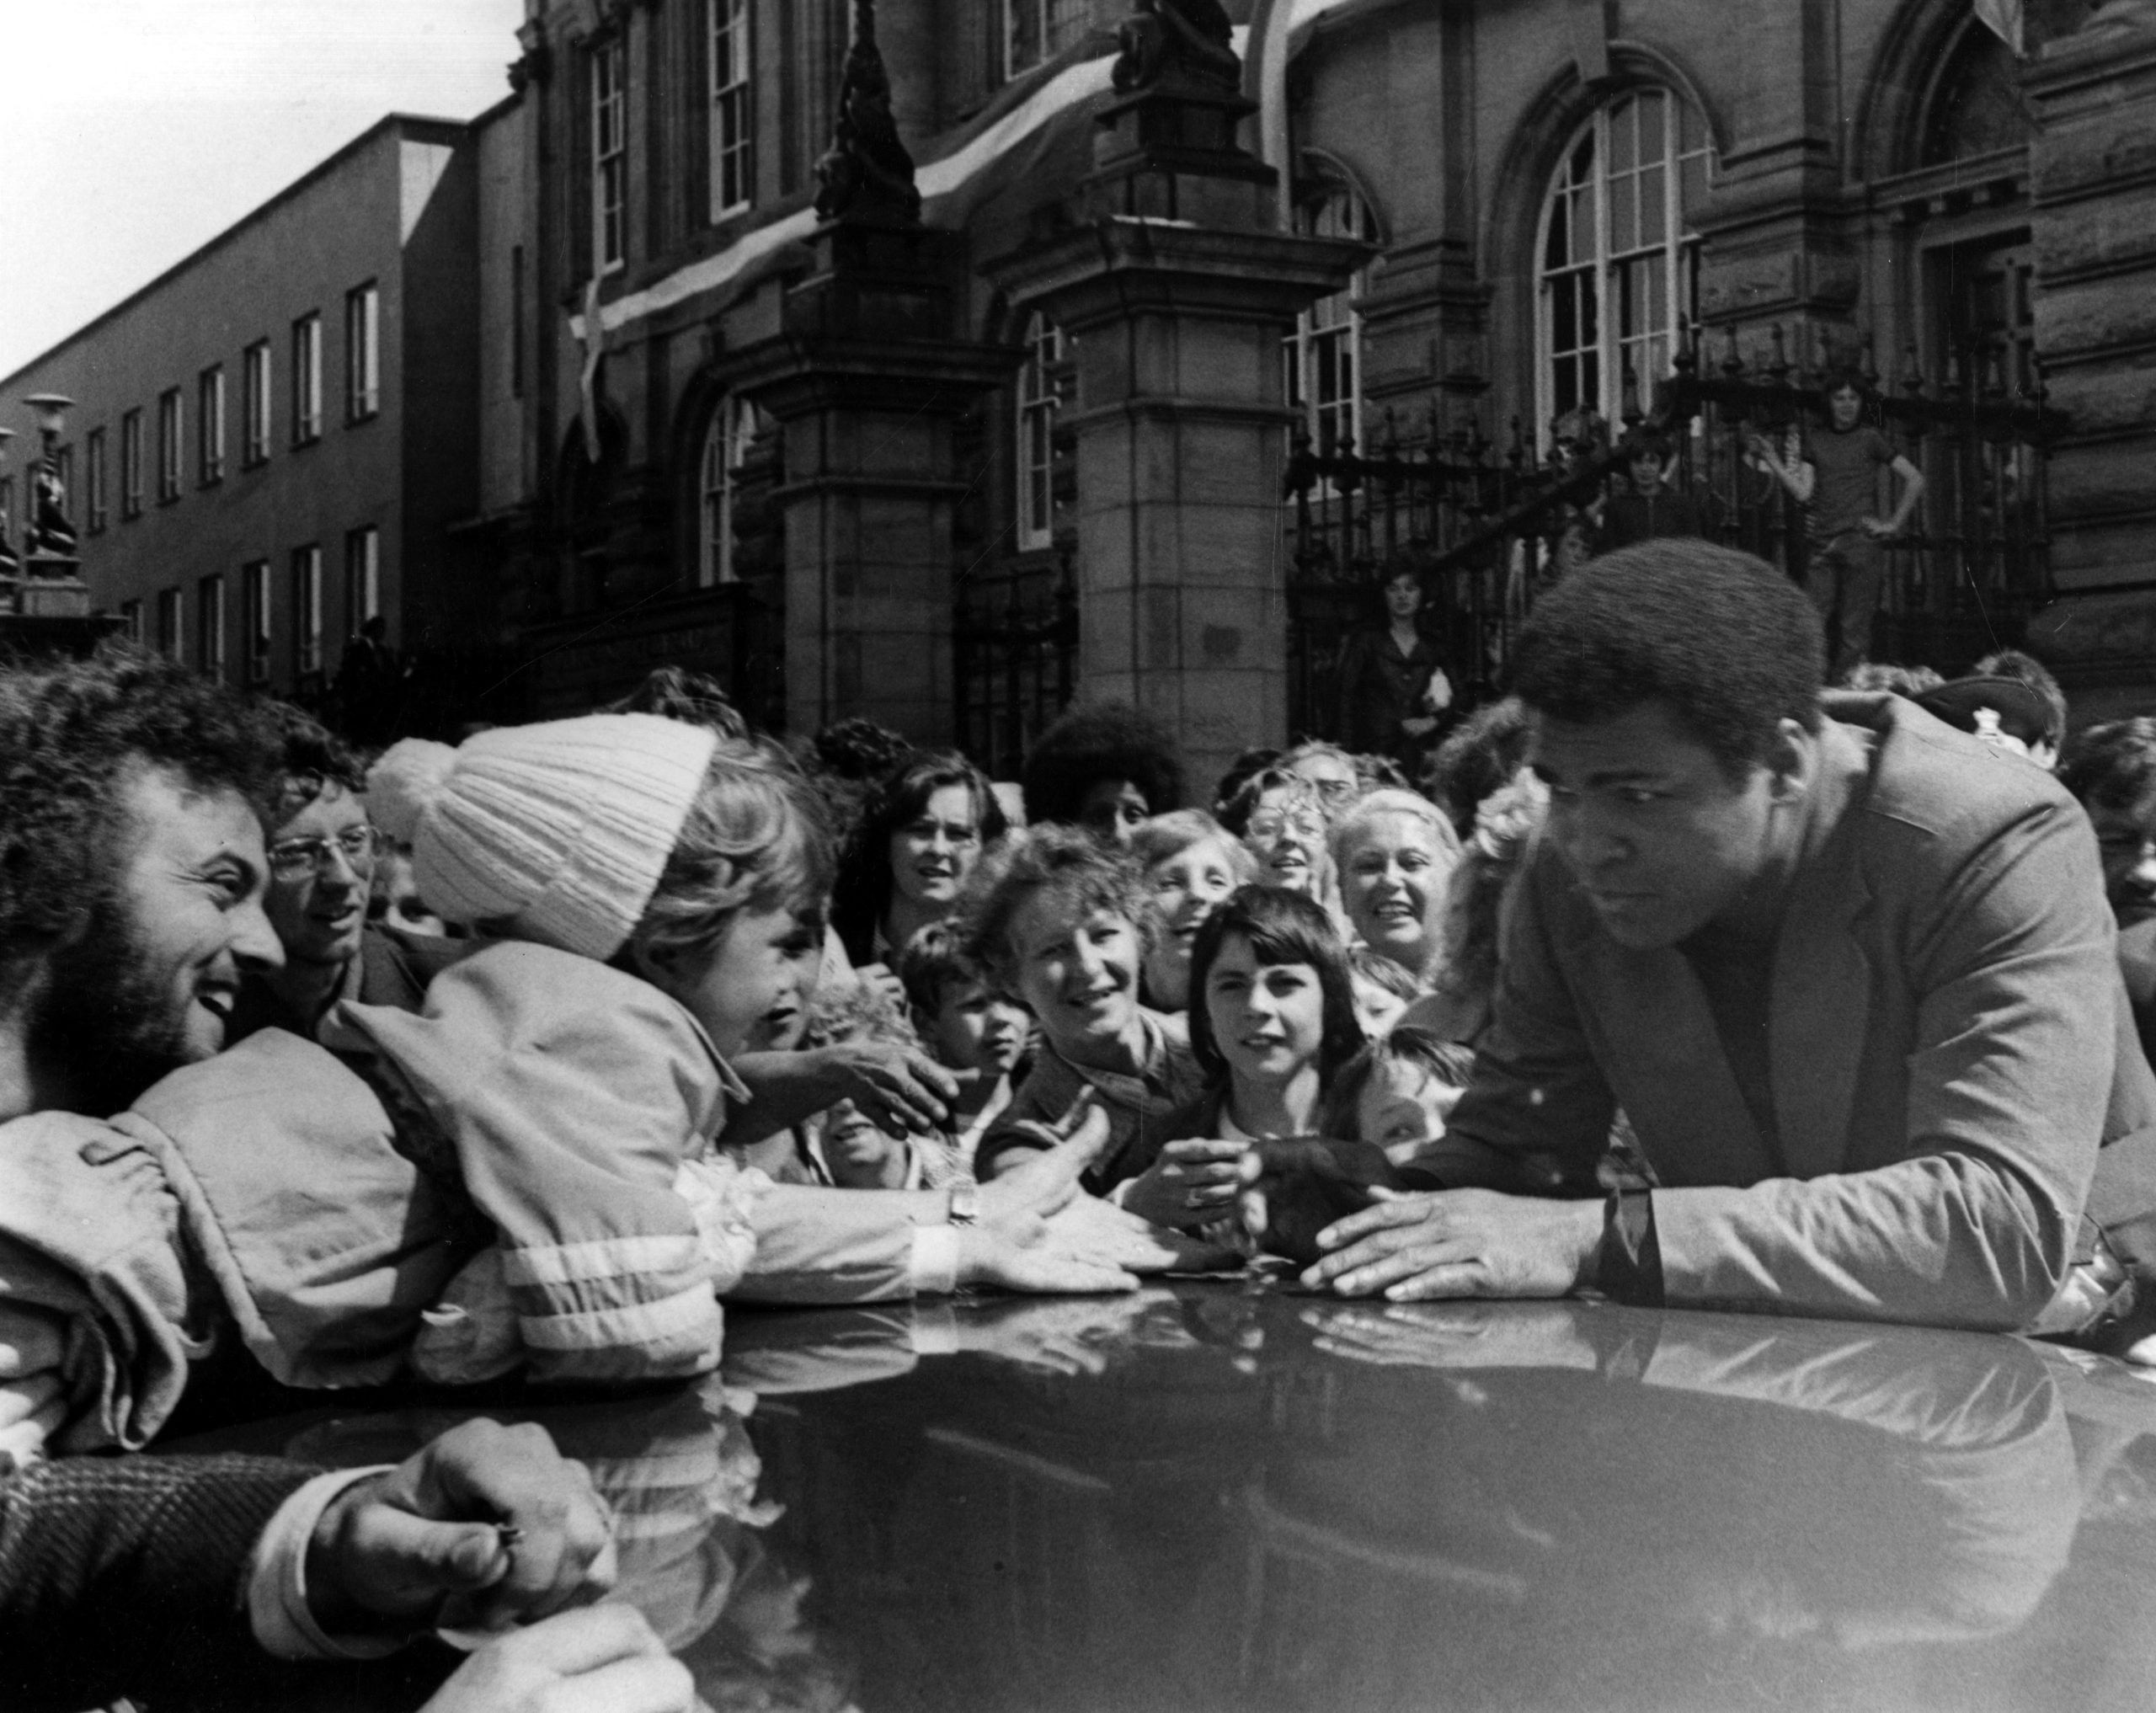 Muhammad Ali greets a young fan outside South Shields Town Hall on Saturday 16 July 1977